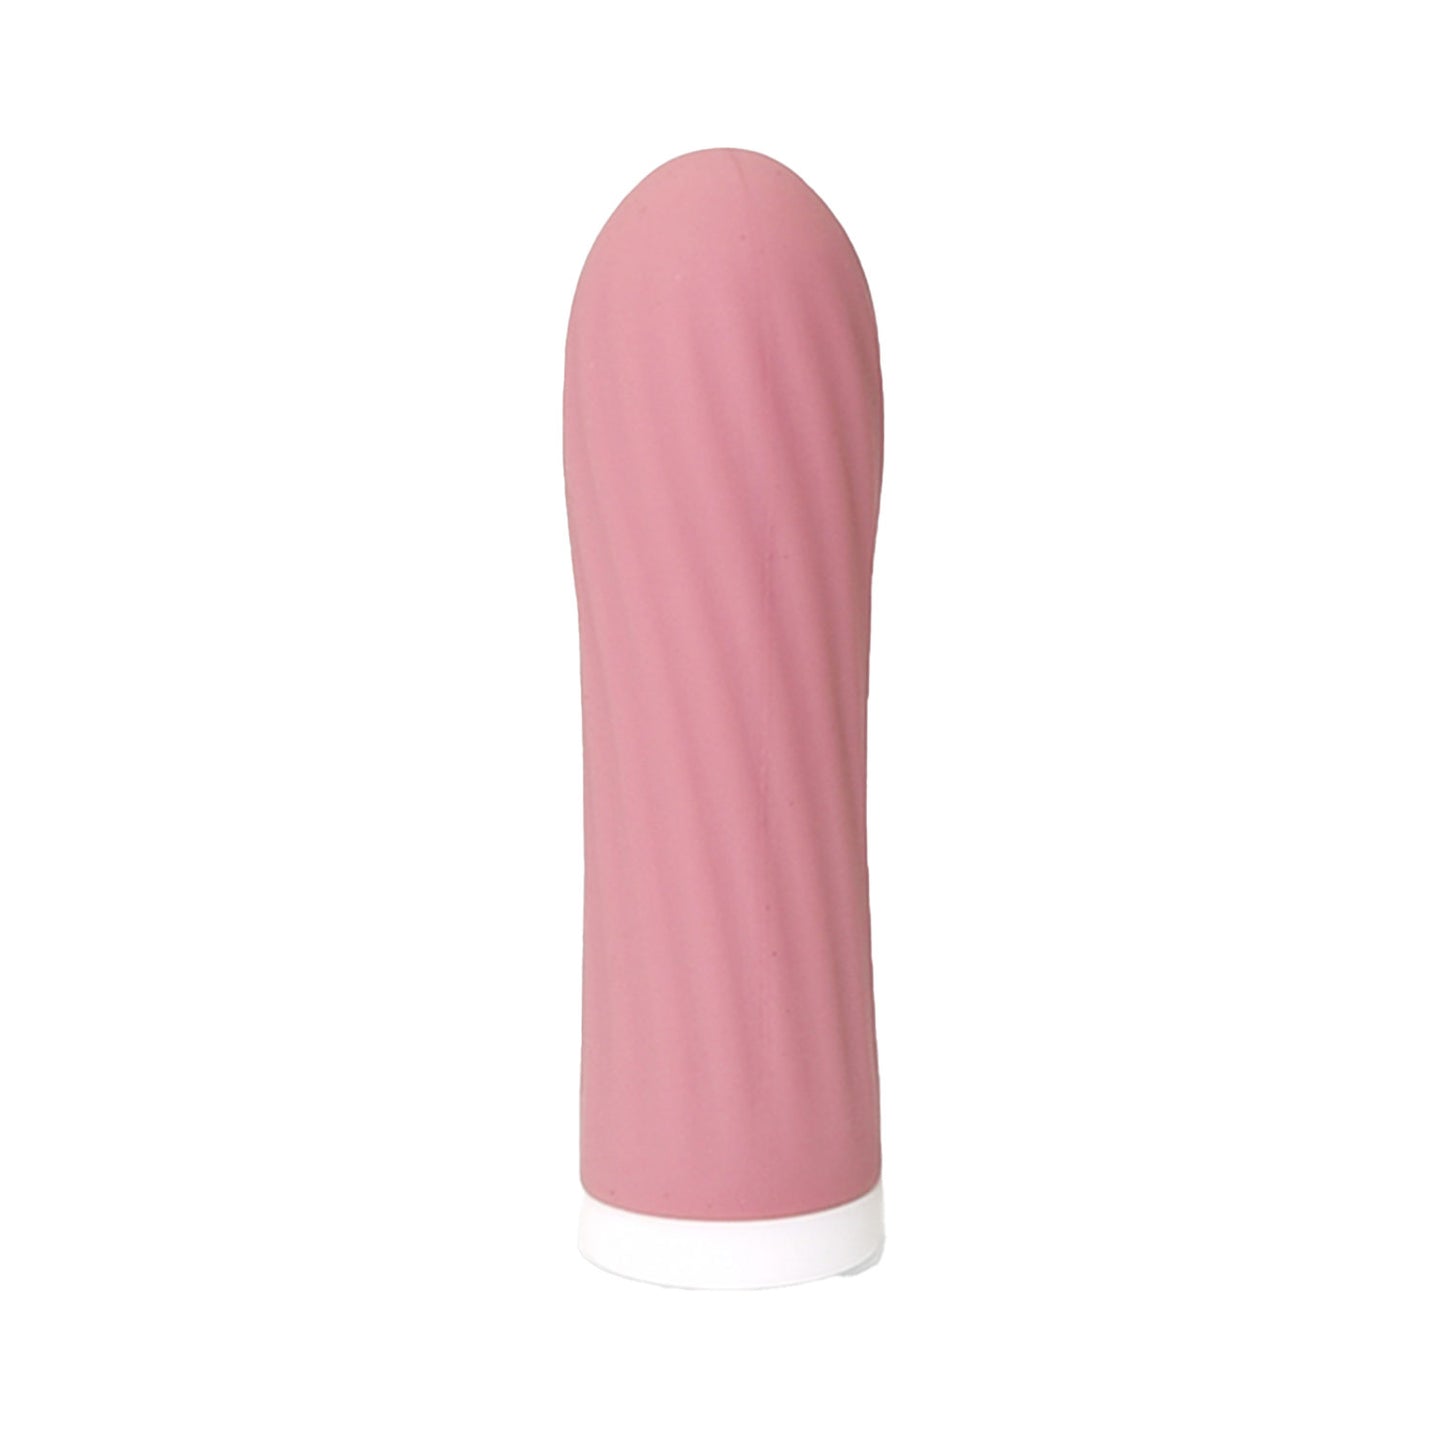 The Horny Company - Blush Blossom Collection Rechargeable Hush Vibrating Bullet